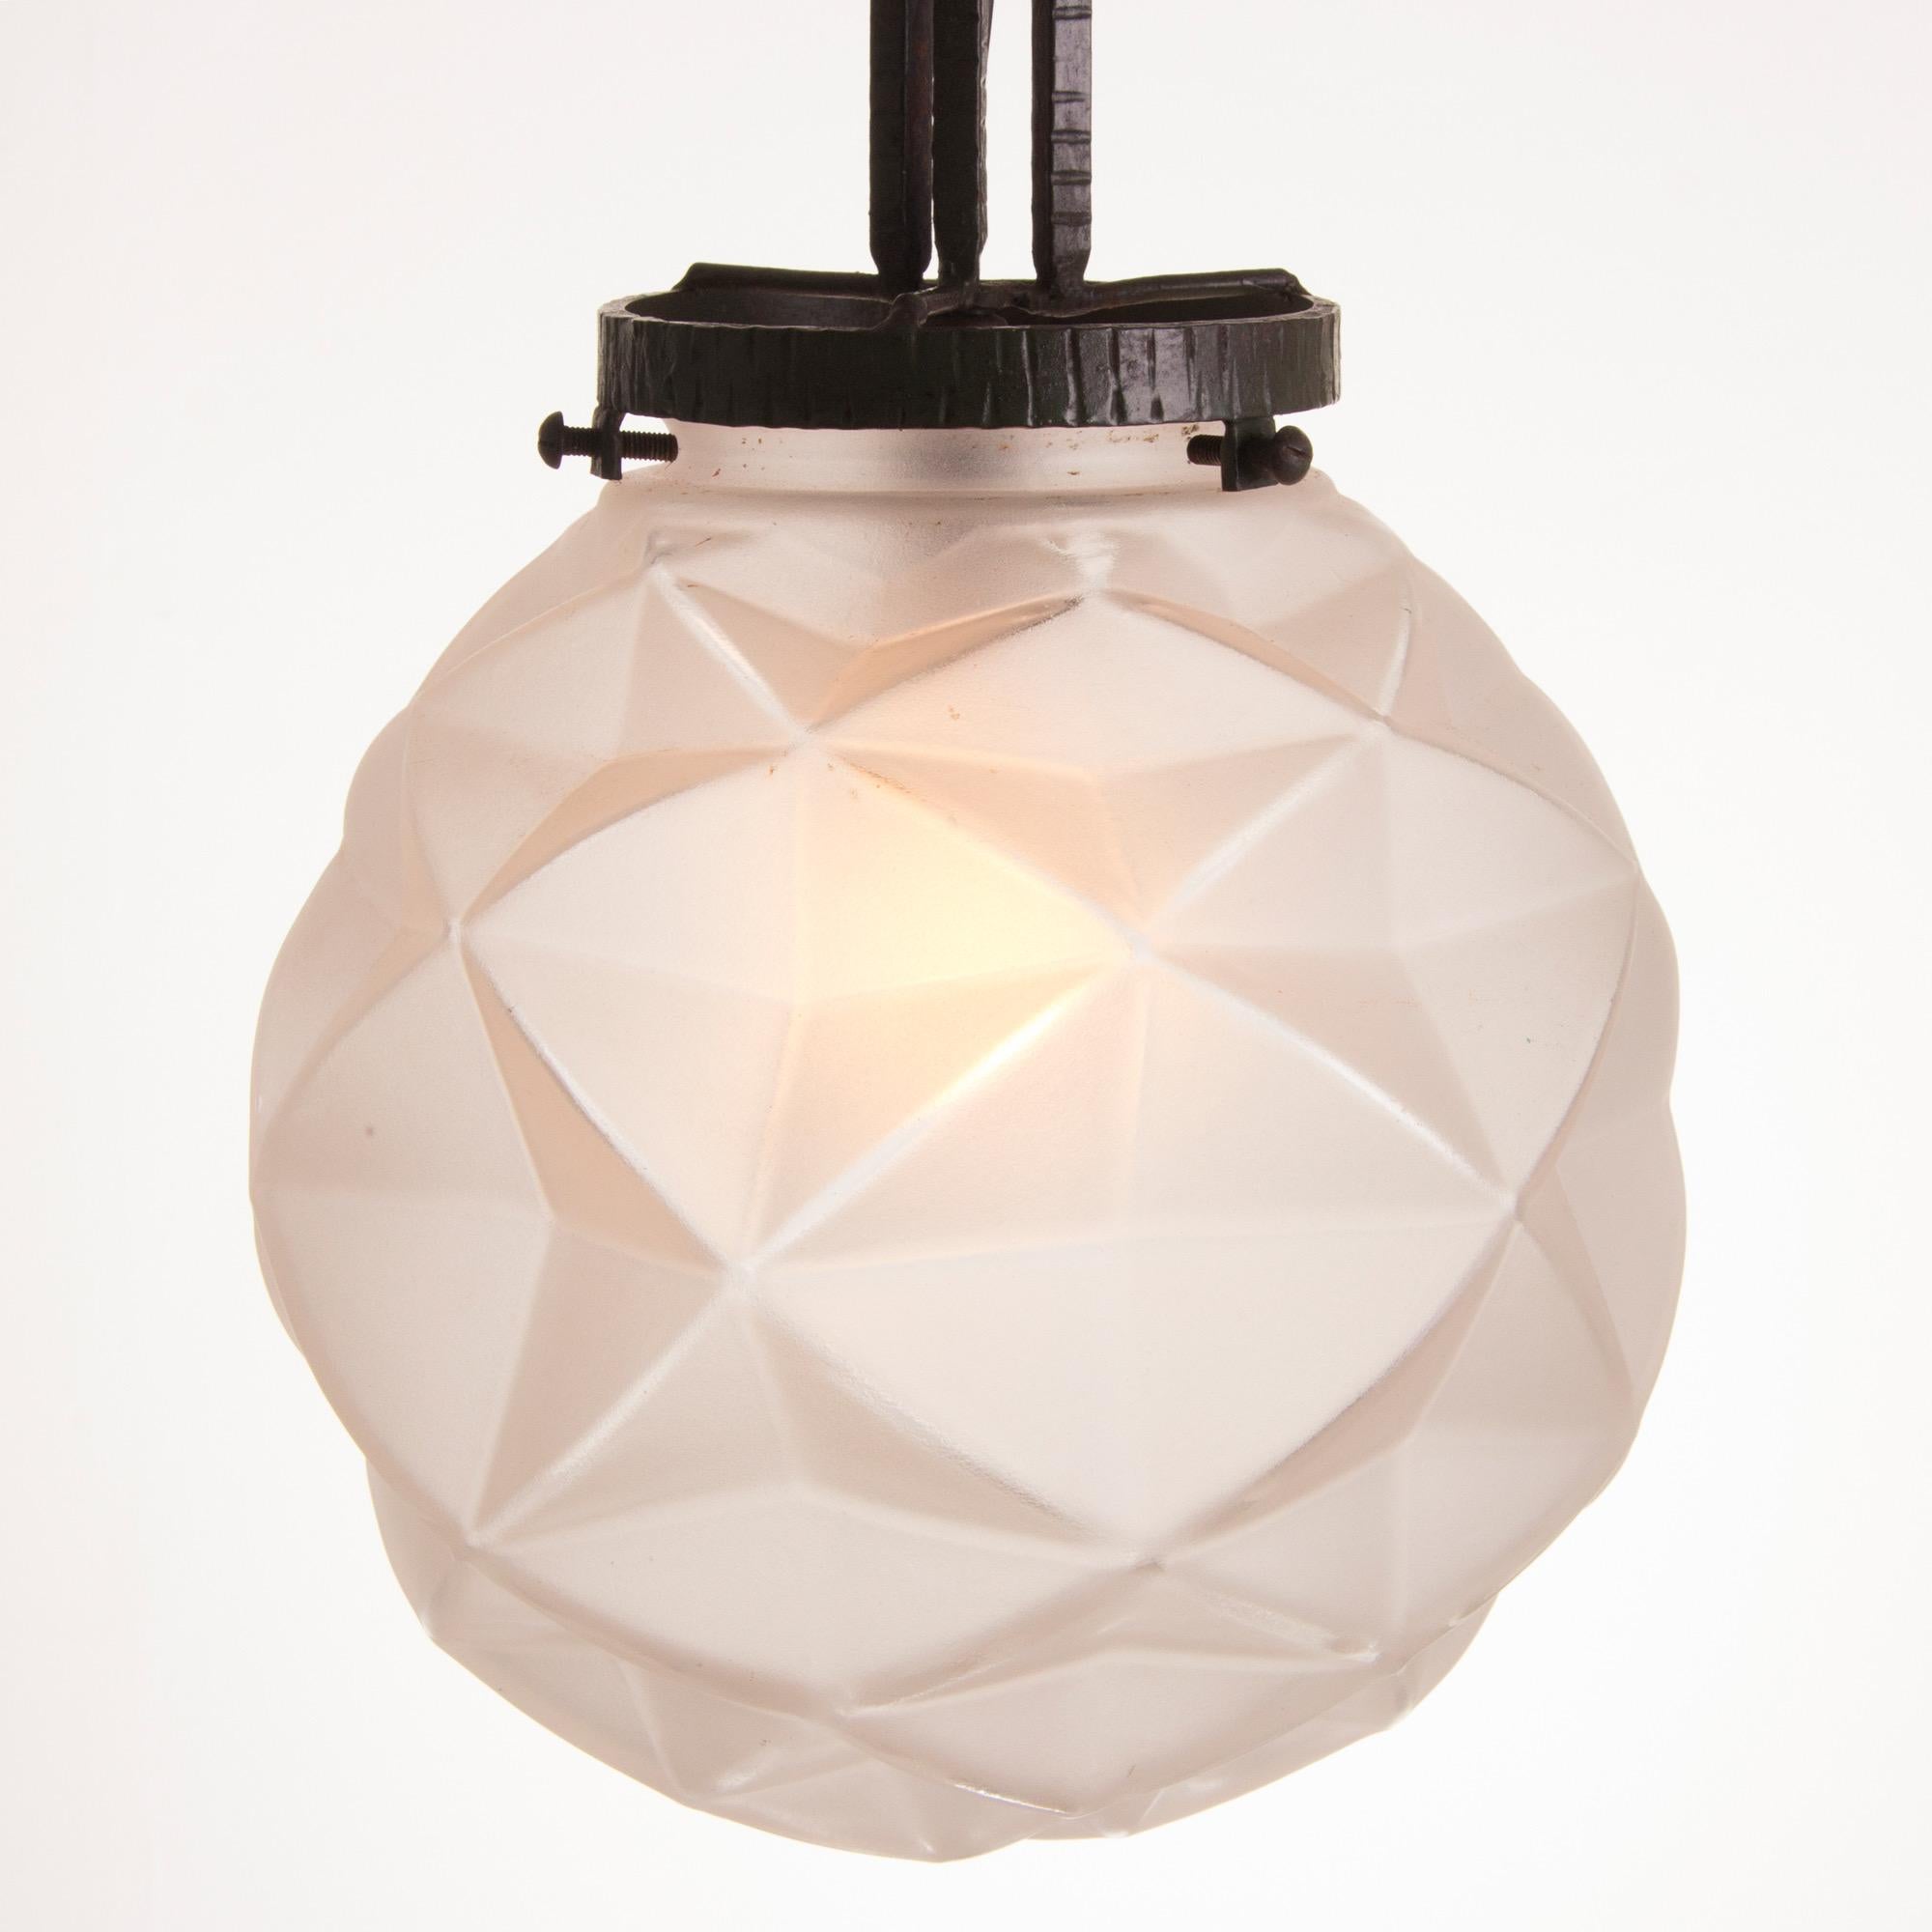 Art Deco ceiling pendant.
A good geometric style glass ball light suspended on wrought iron rods with ceiling rose.
Measures: H 83 cm, W 23 cm, D 23 cm.
French, circa 1928.